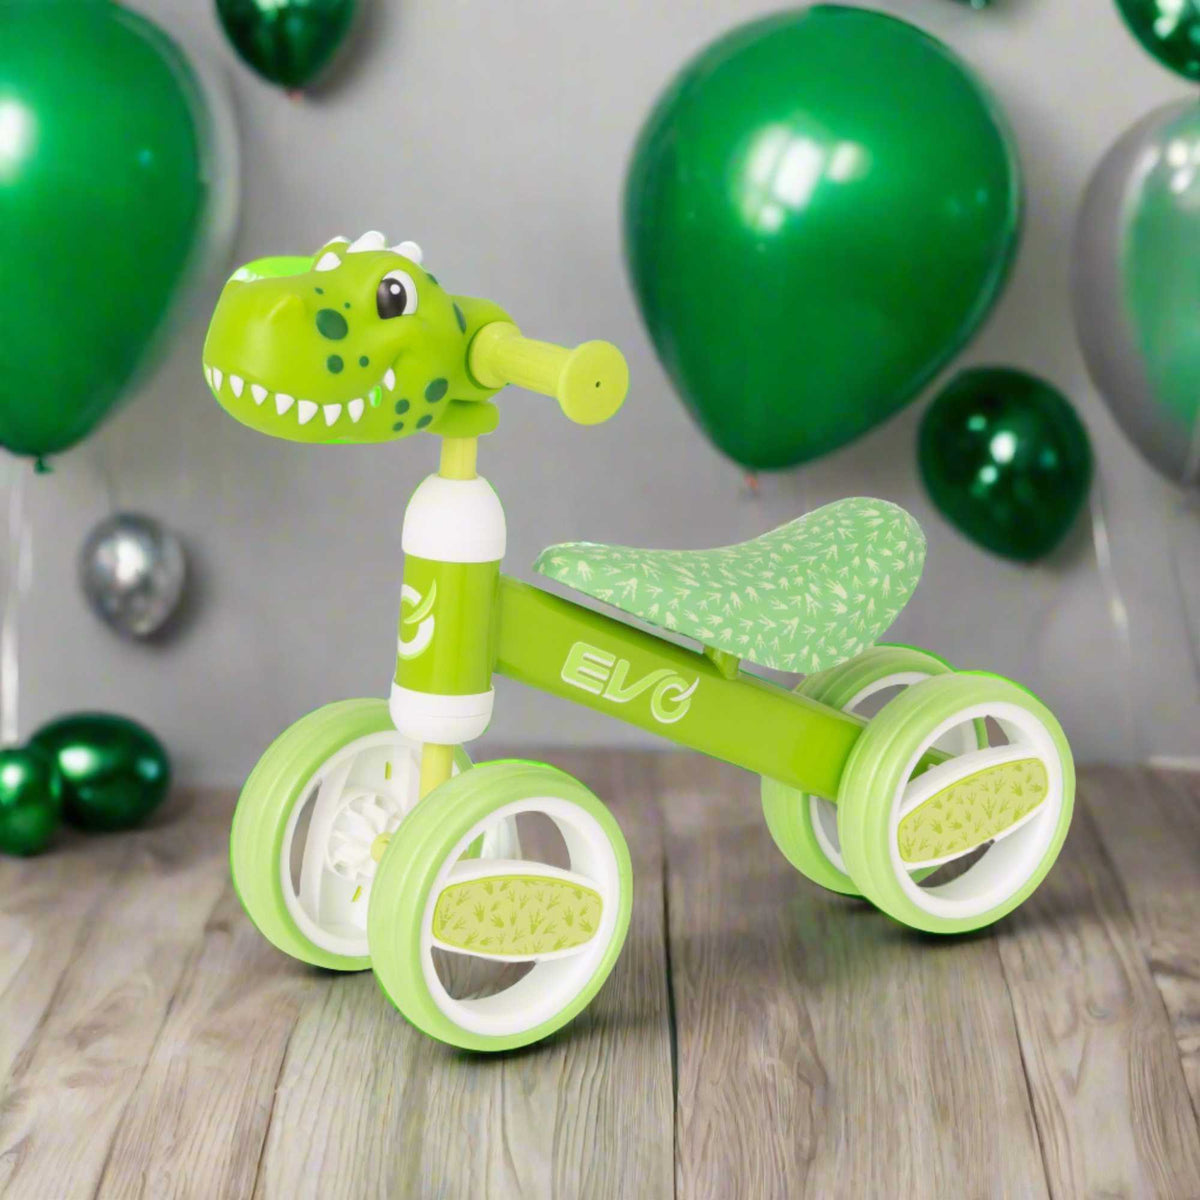 Fun and colourful EVO Character Heads Bobble Bike featuring adorable Unicorn and Dino designs for kids, perfect for teaching children balance and coordination.